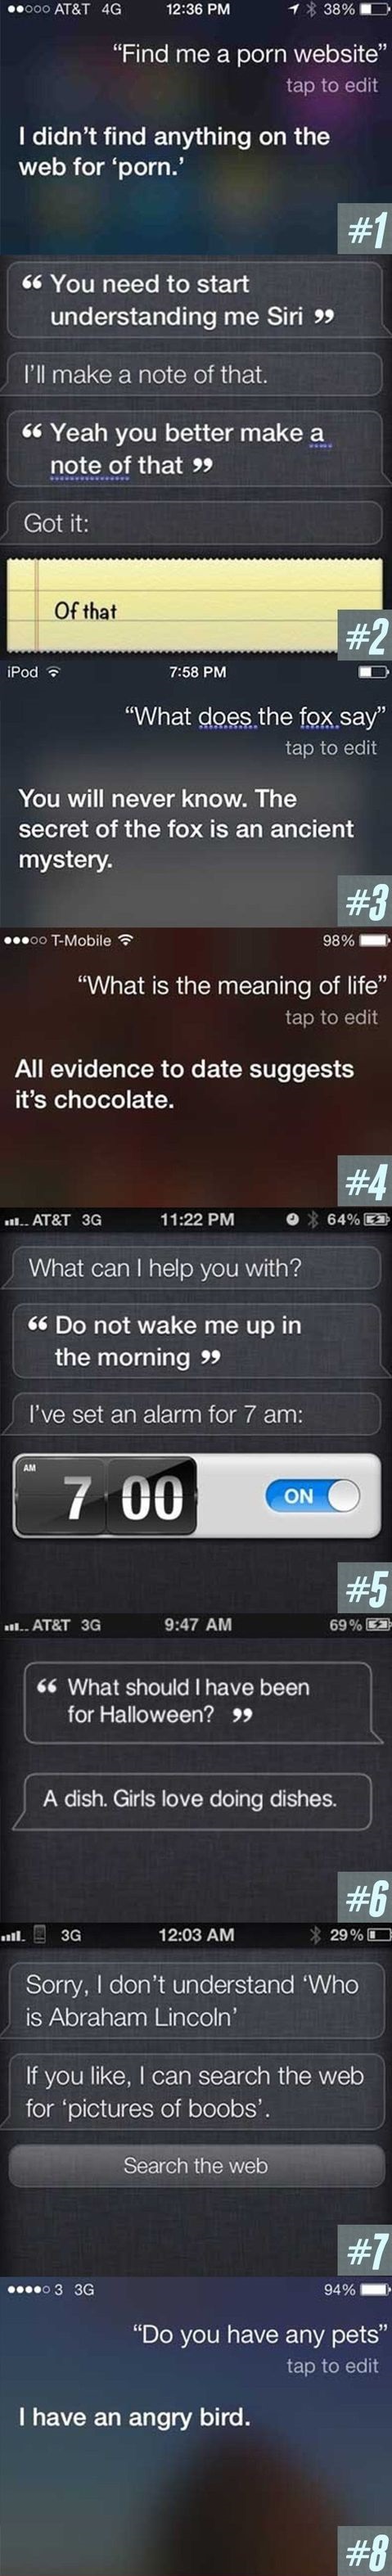 funny-picture-clever-siri-compilation